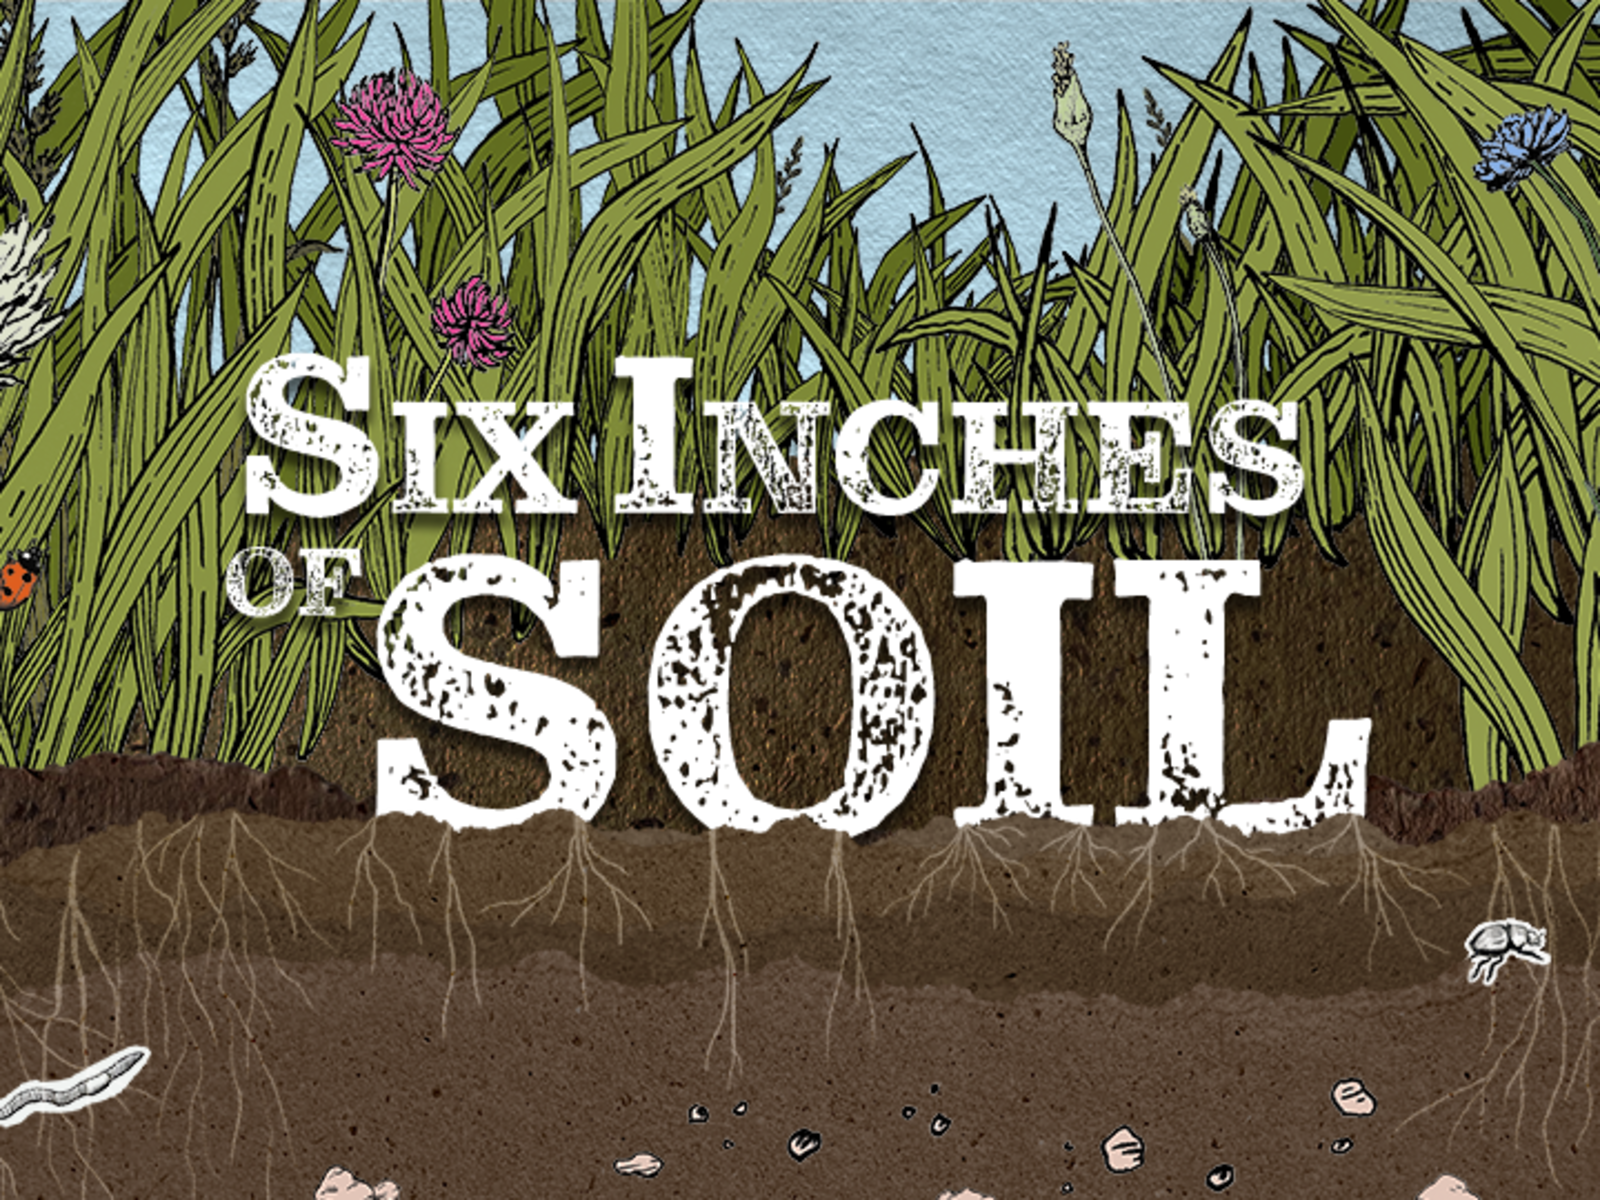 Six Inches of Soil